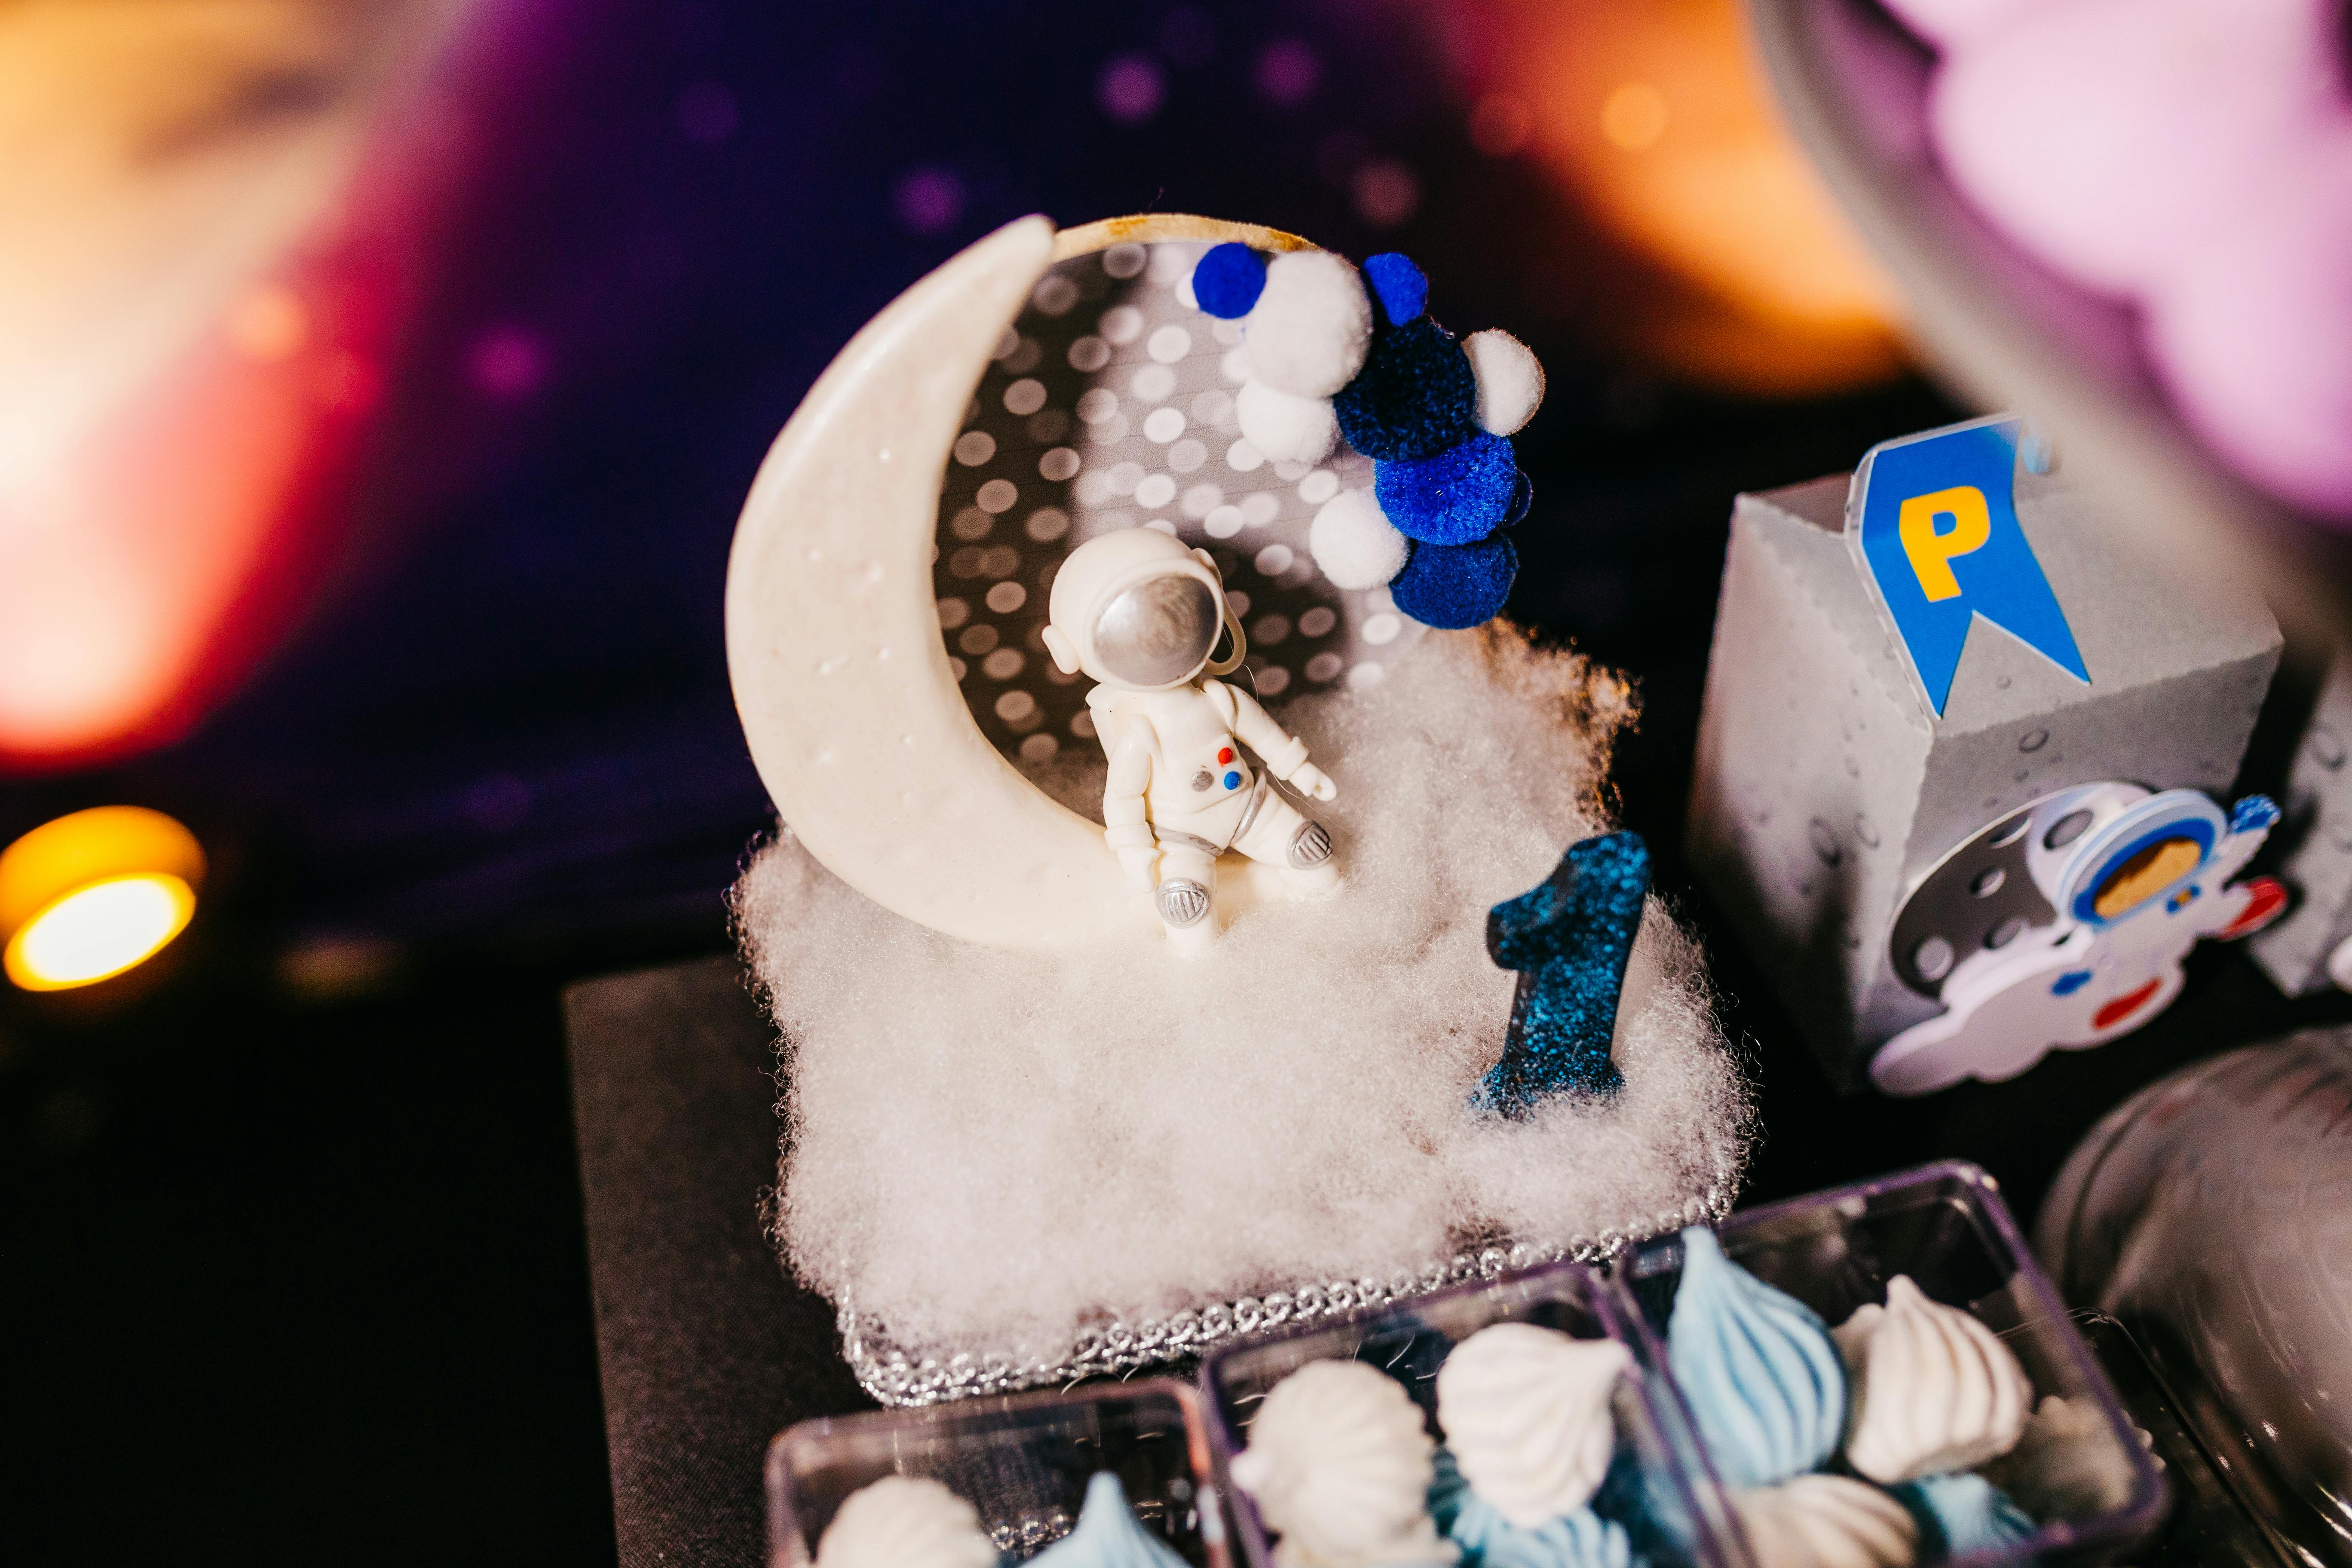 meringues and an astronaut figurine sitting on the moon